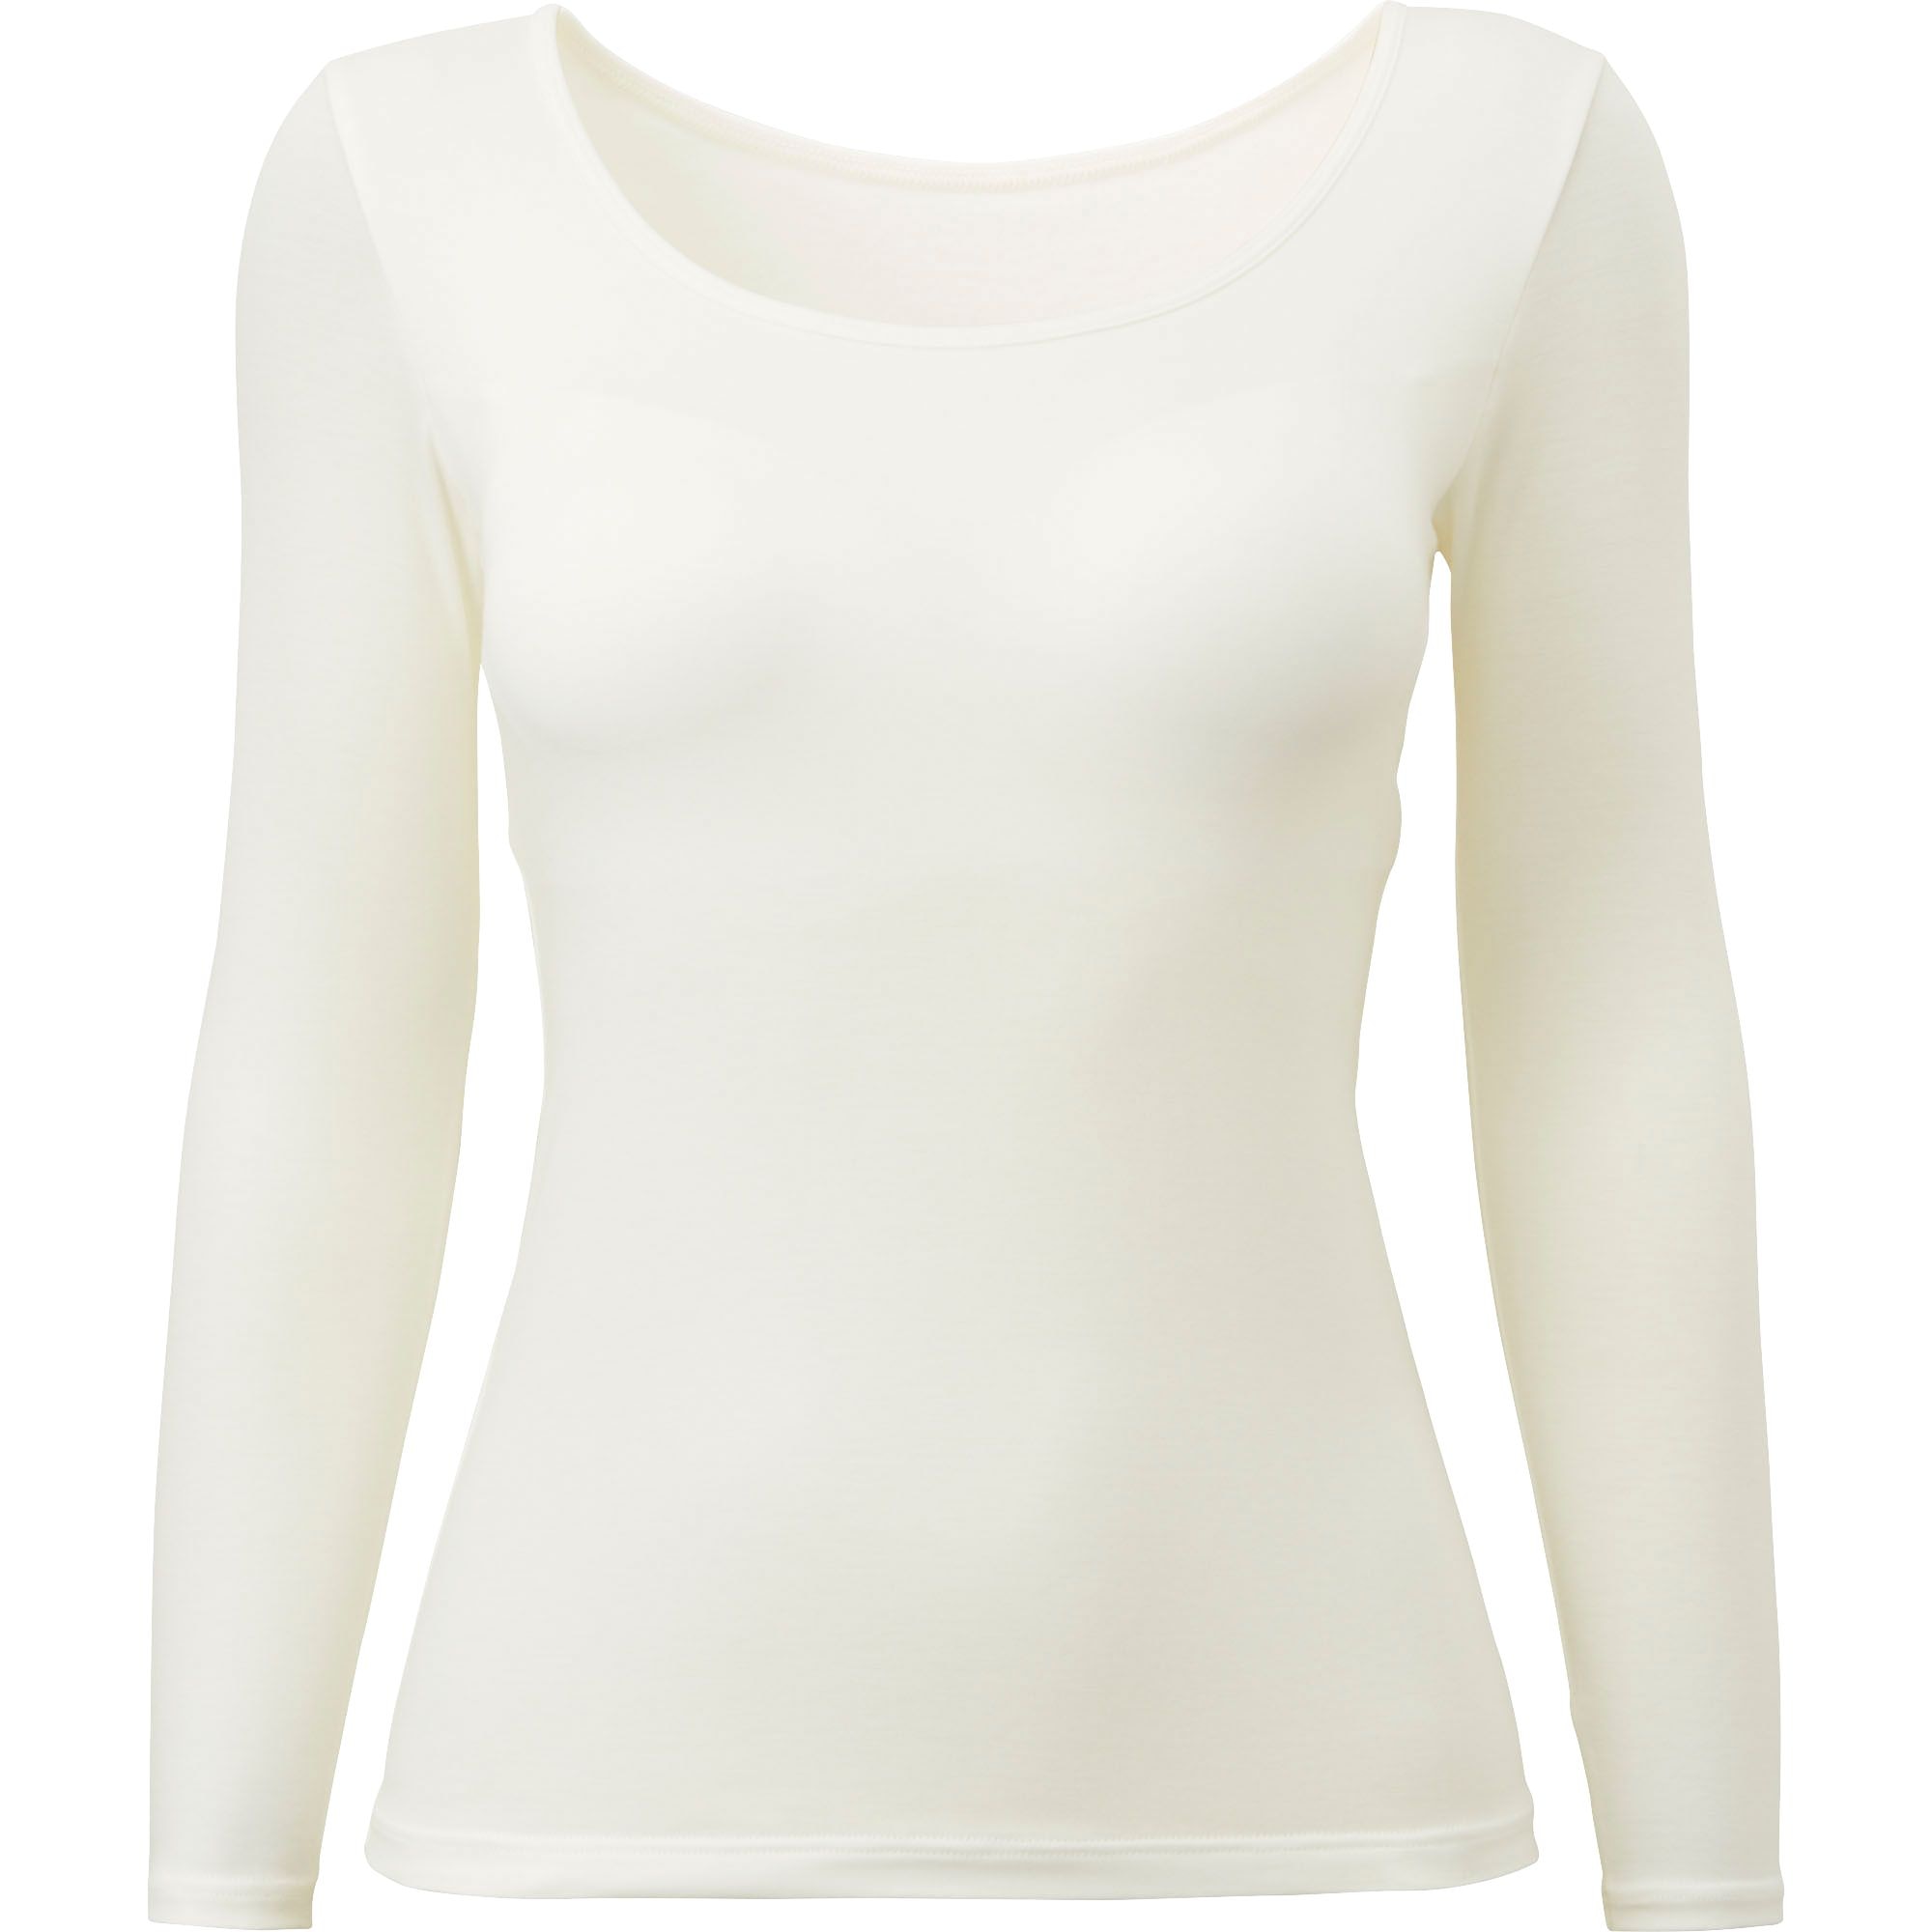 HEATTECH Extra Warm Cotton Scoop Neck Long Sleeved Thermal Top